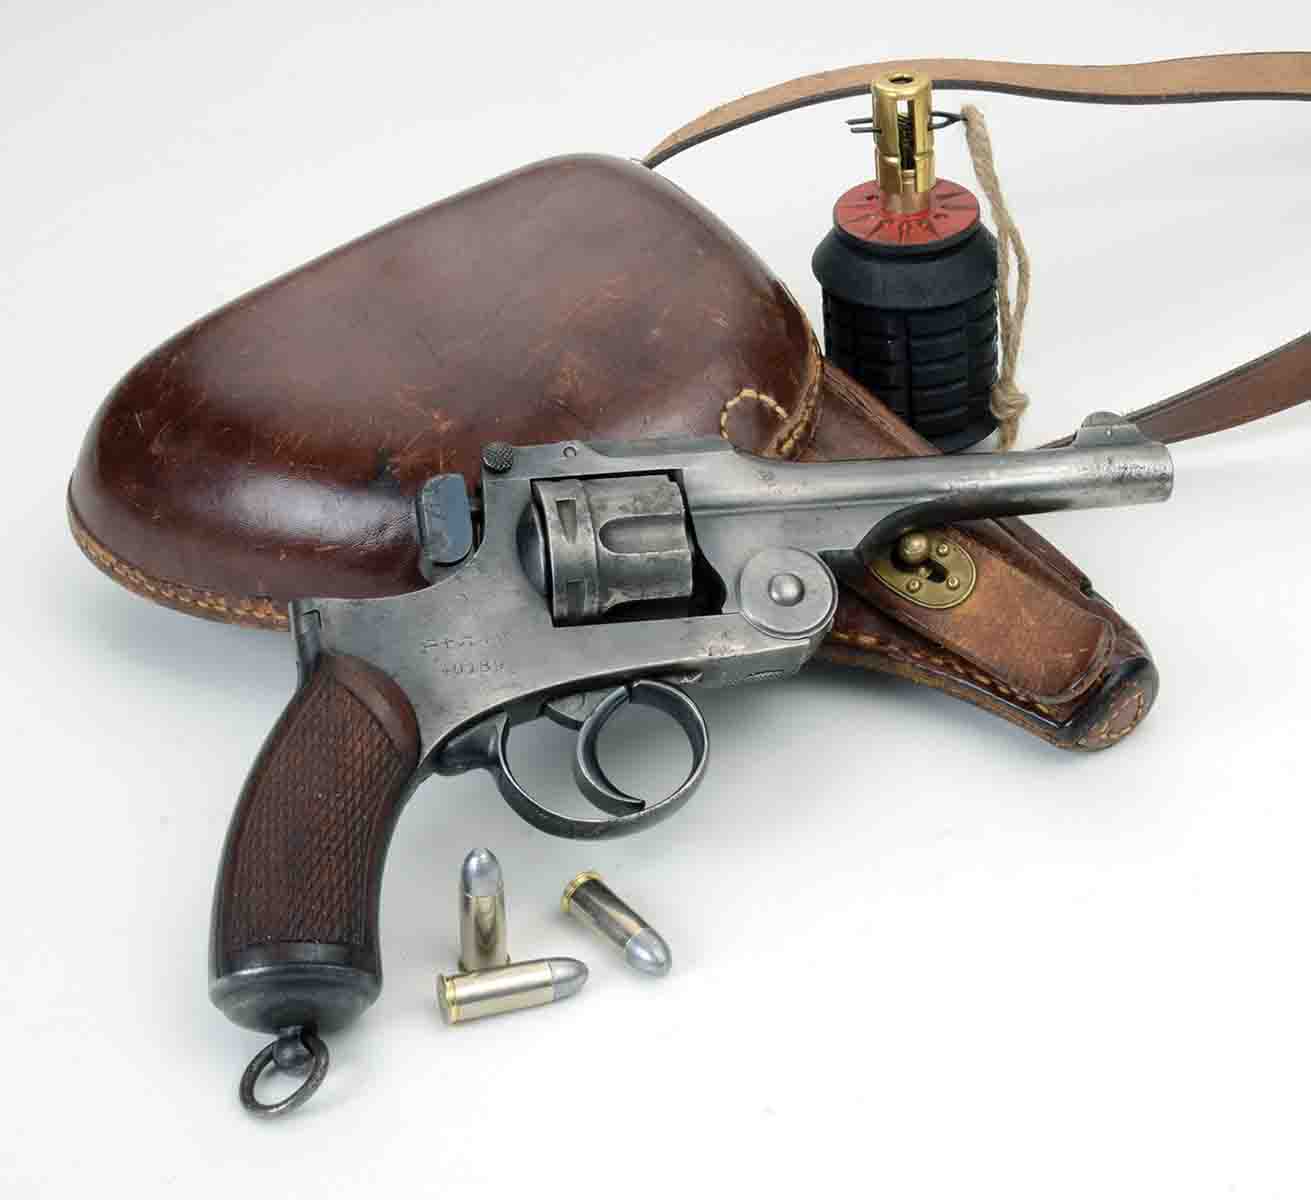 This is a Japanese Type 26 9mm revolver.